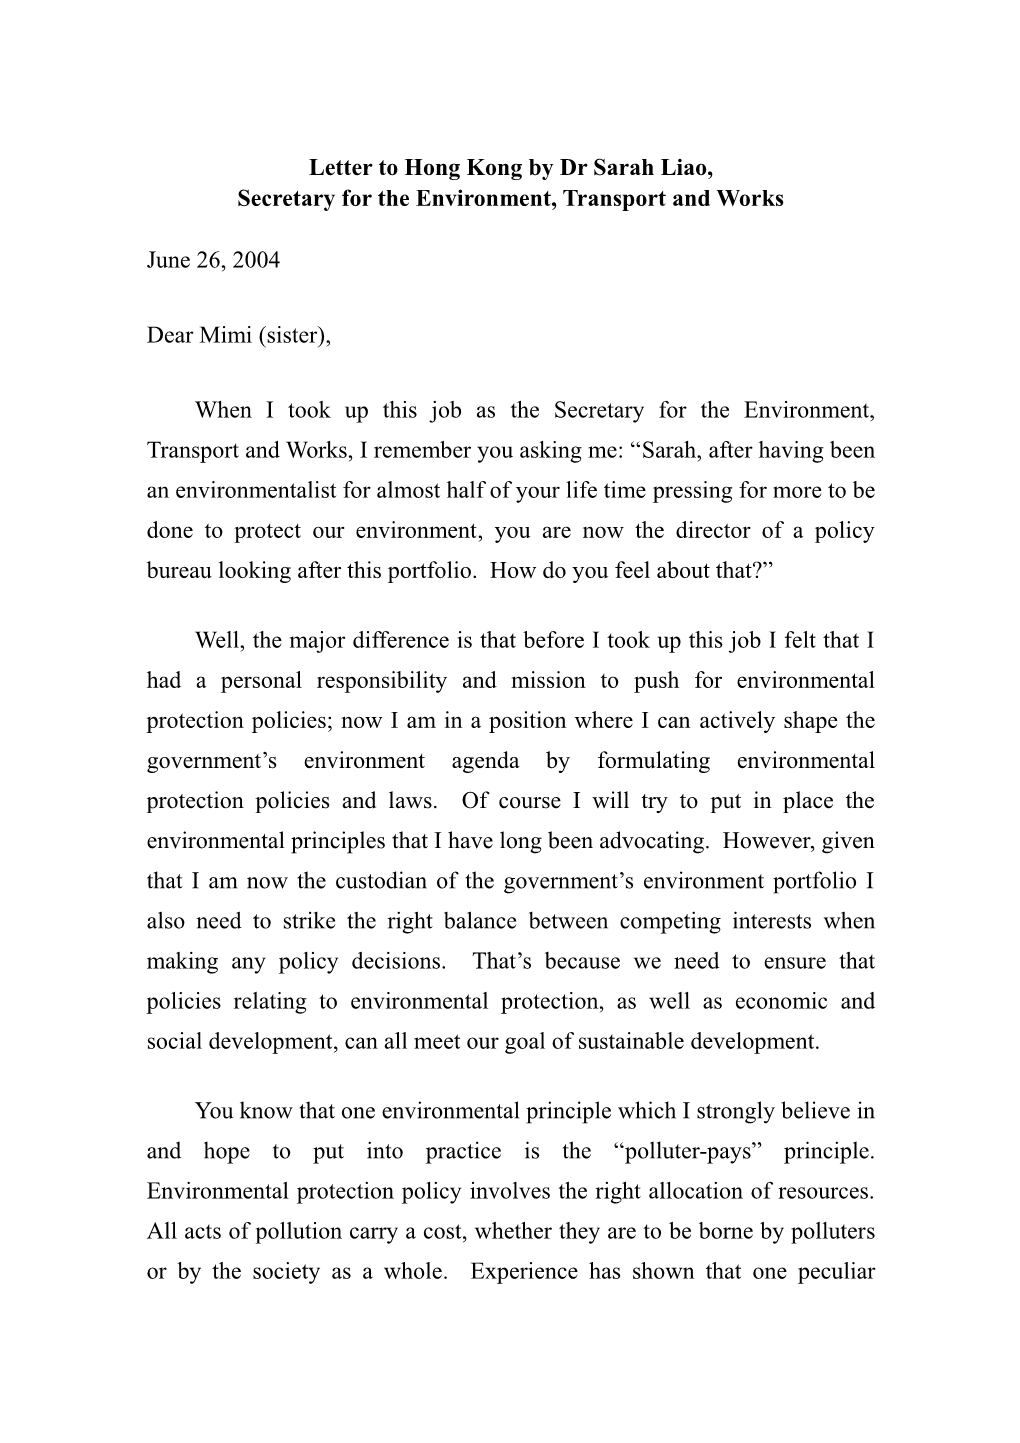 Letter to Hong Kong by Dr Sarah Liao, Secretary for the Environment, Transport and Works